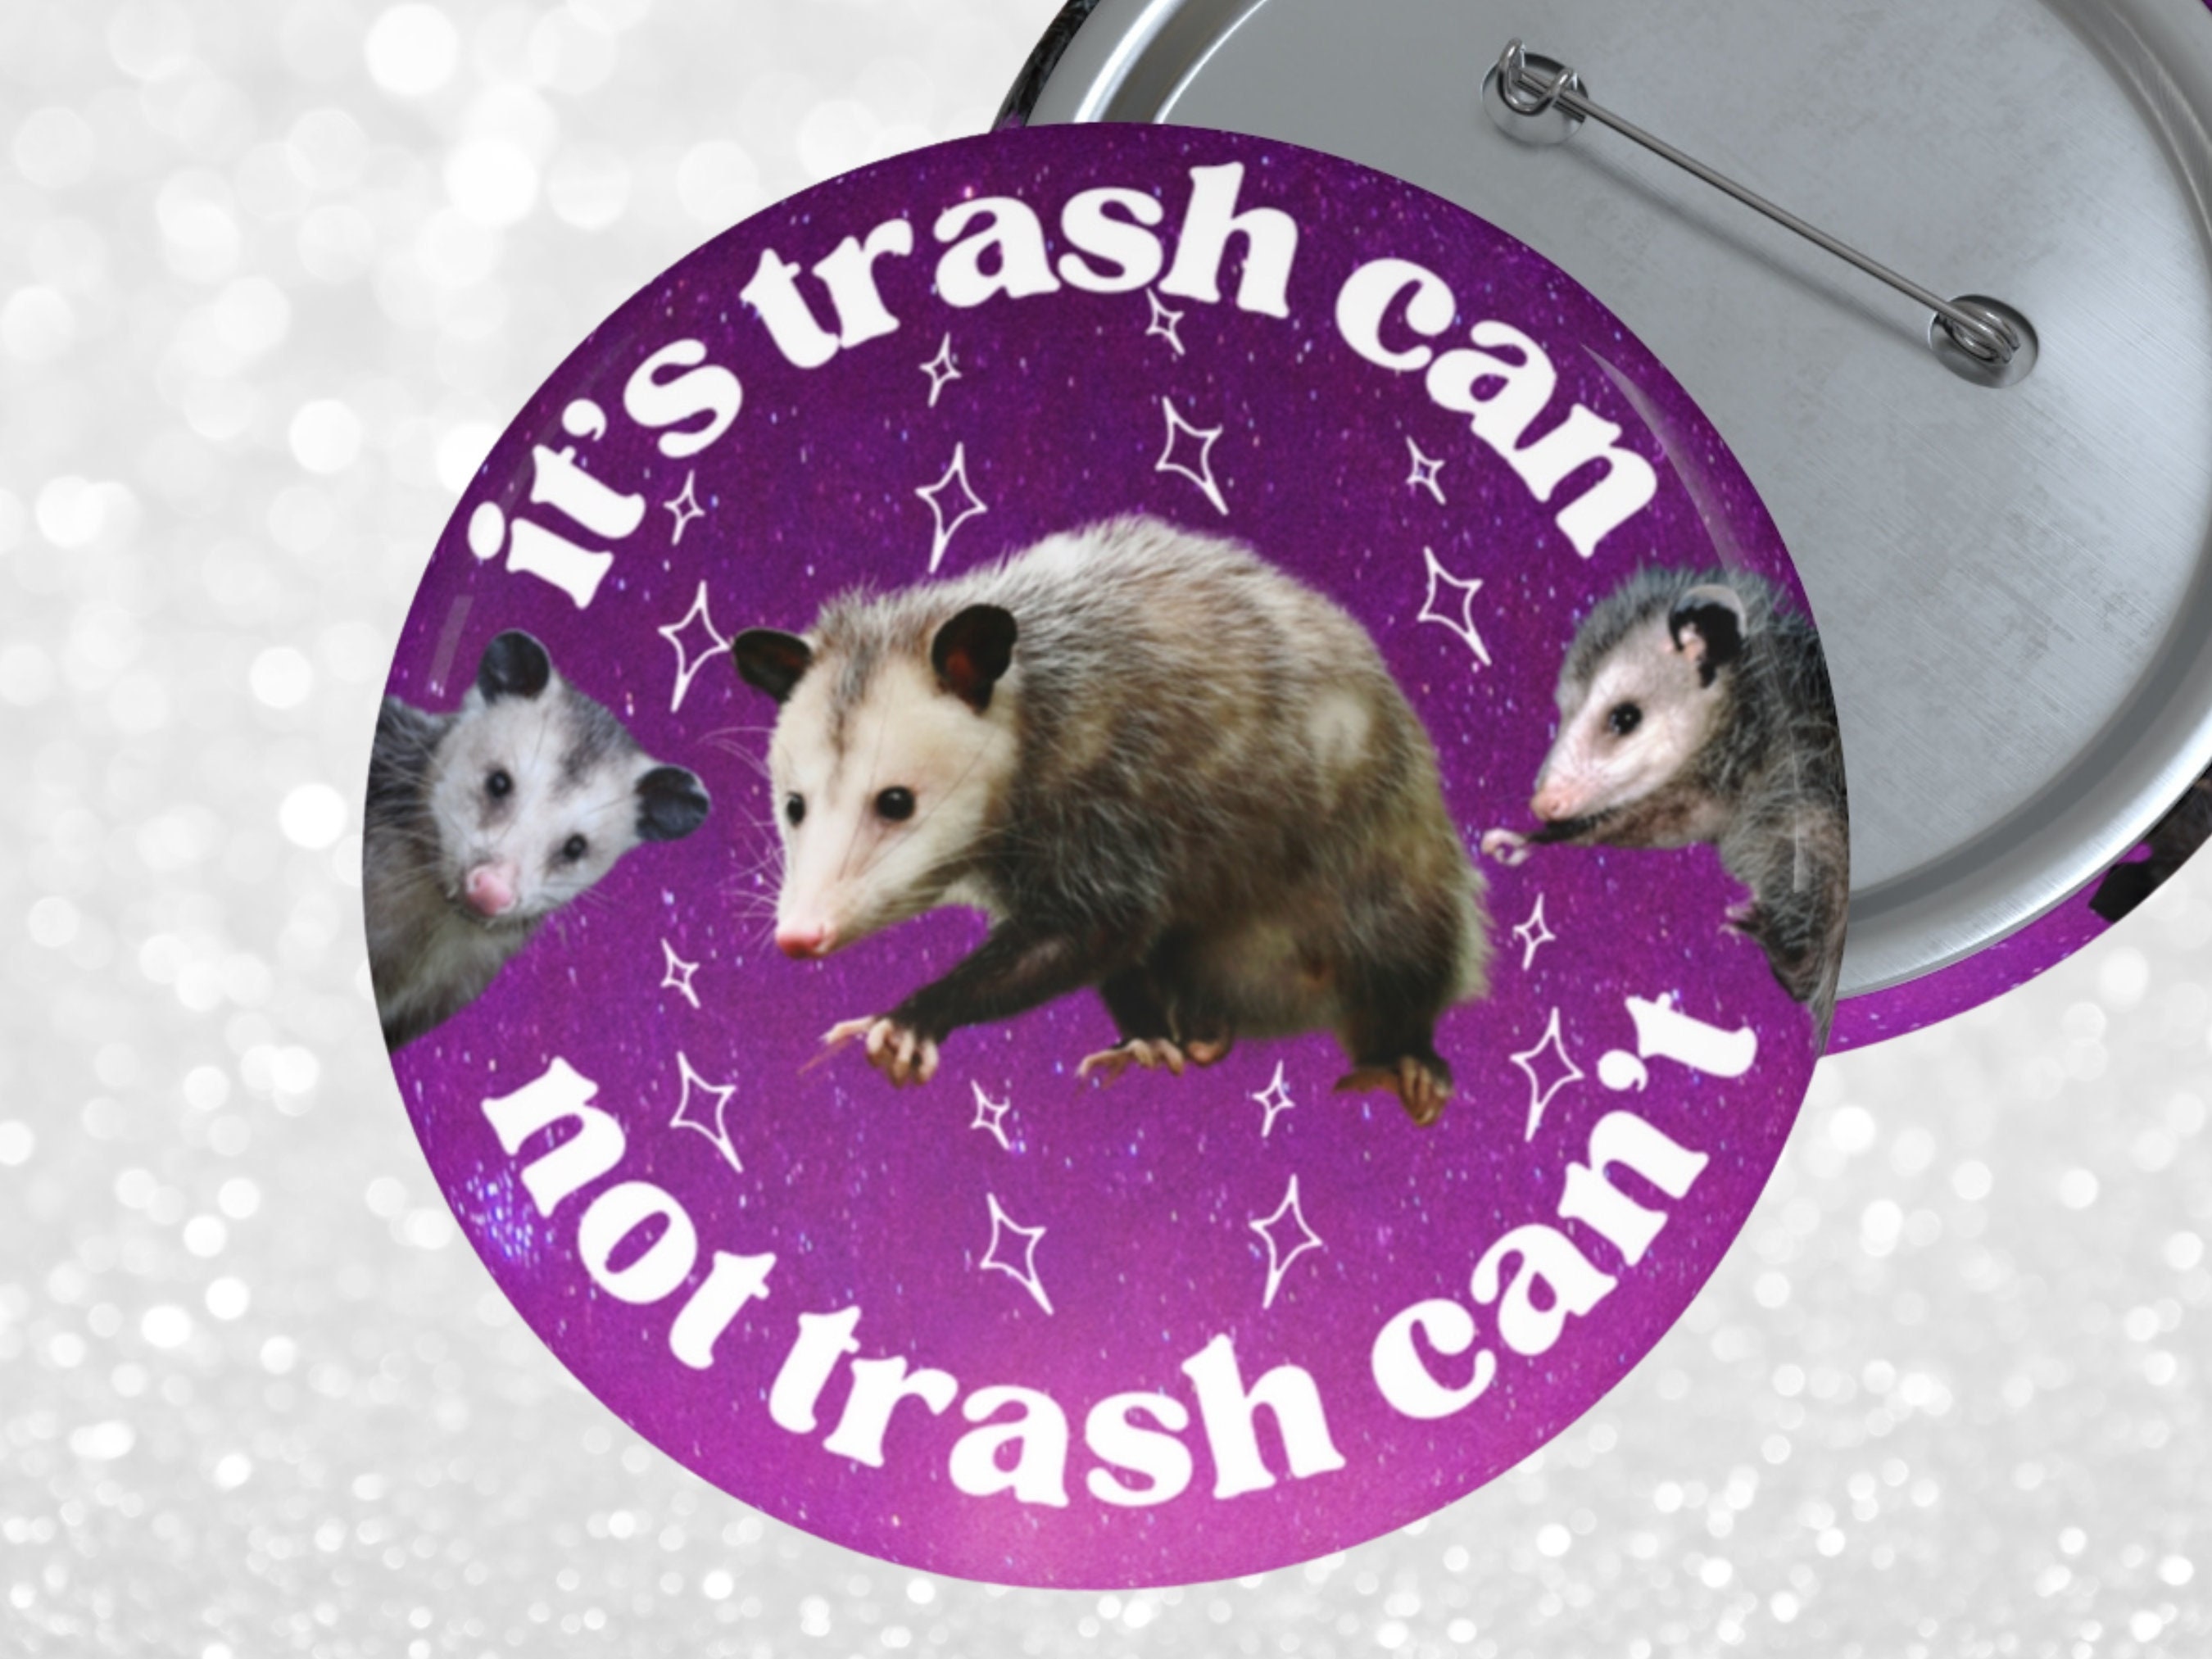 It's trash can, not trash can't pin button | Funny Motivational Pin Button Badge | Possum Opossum Purple Galaxy Pin | Gifts under 5